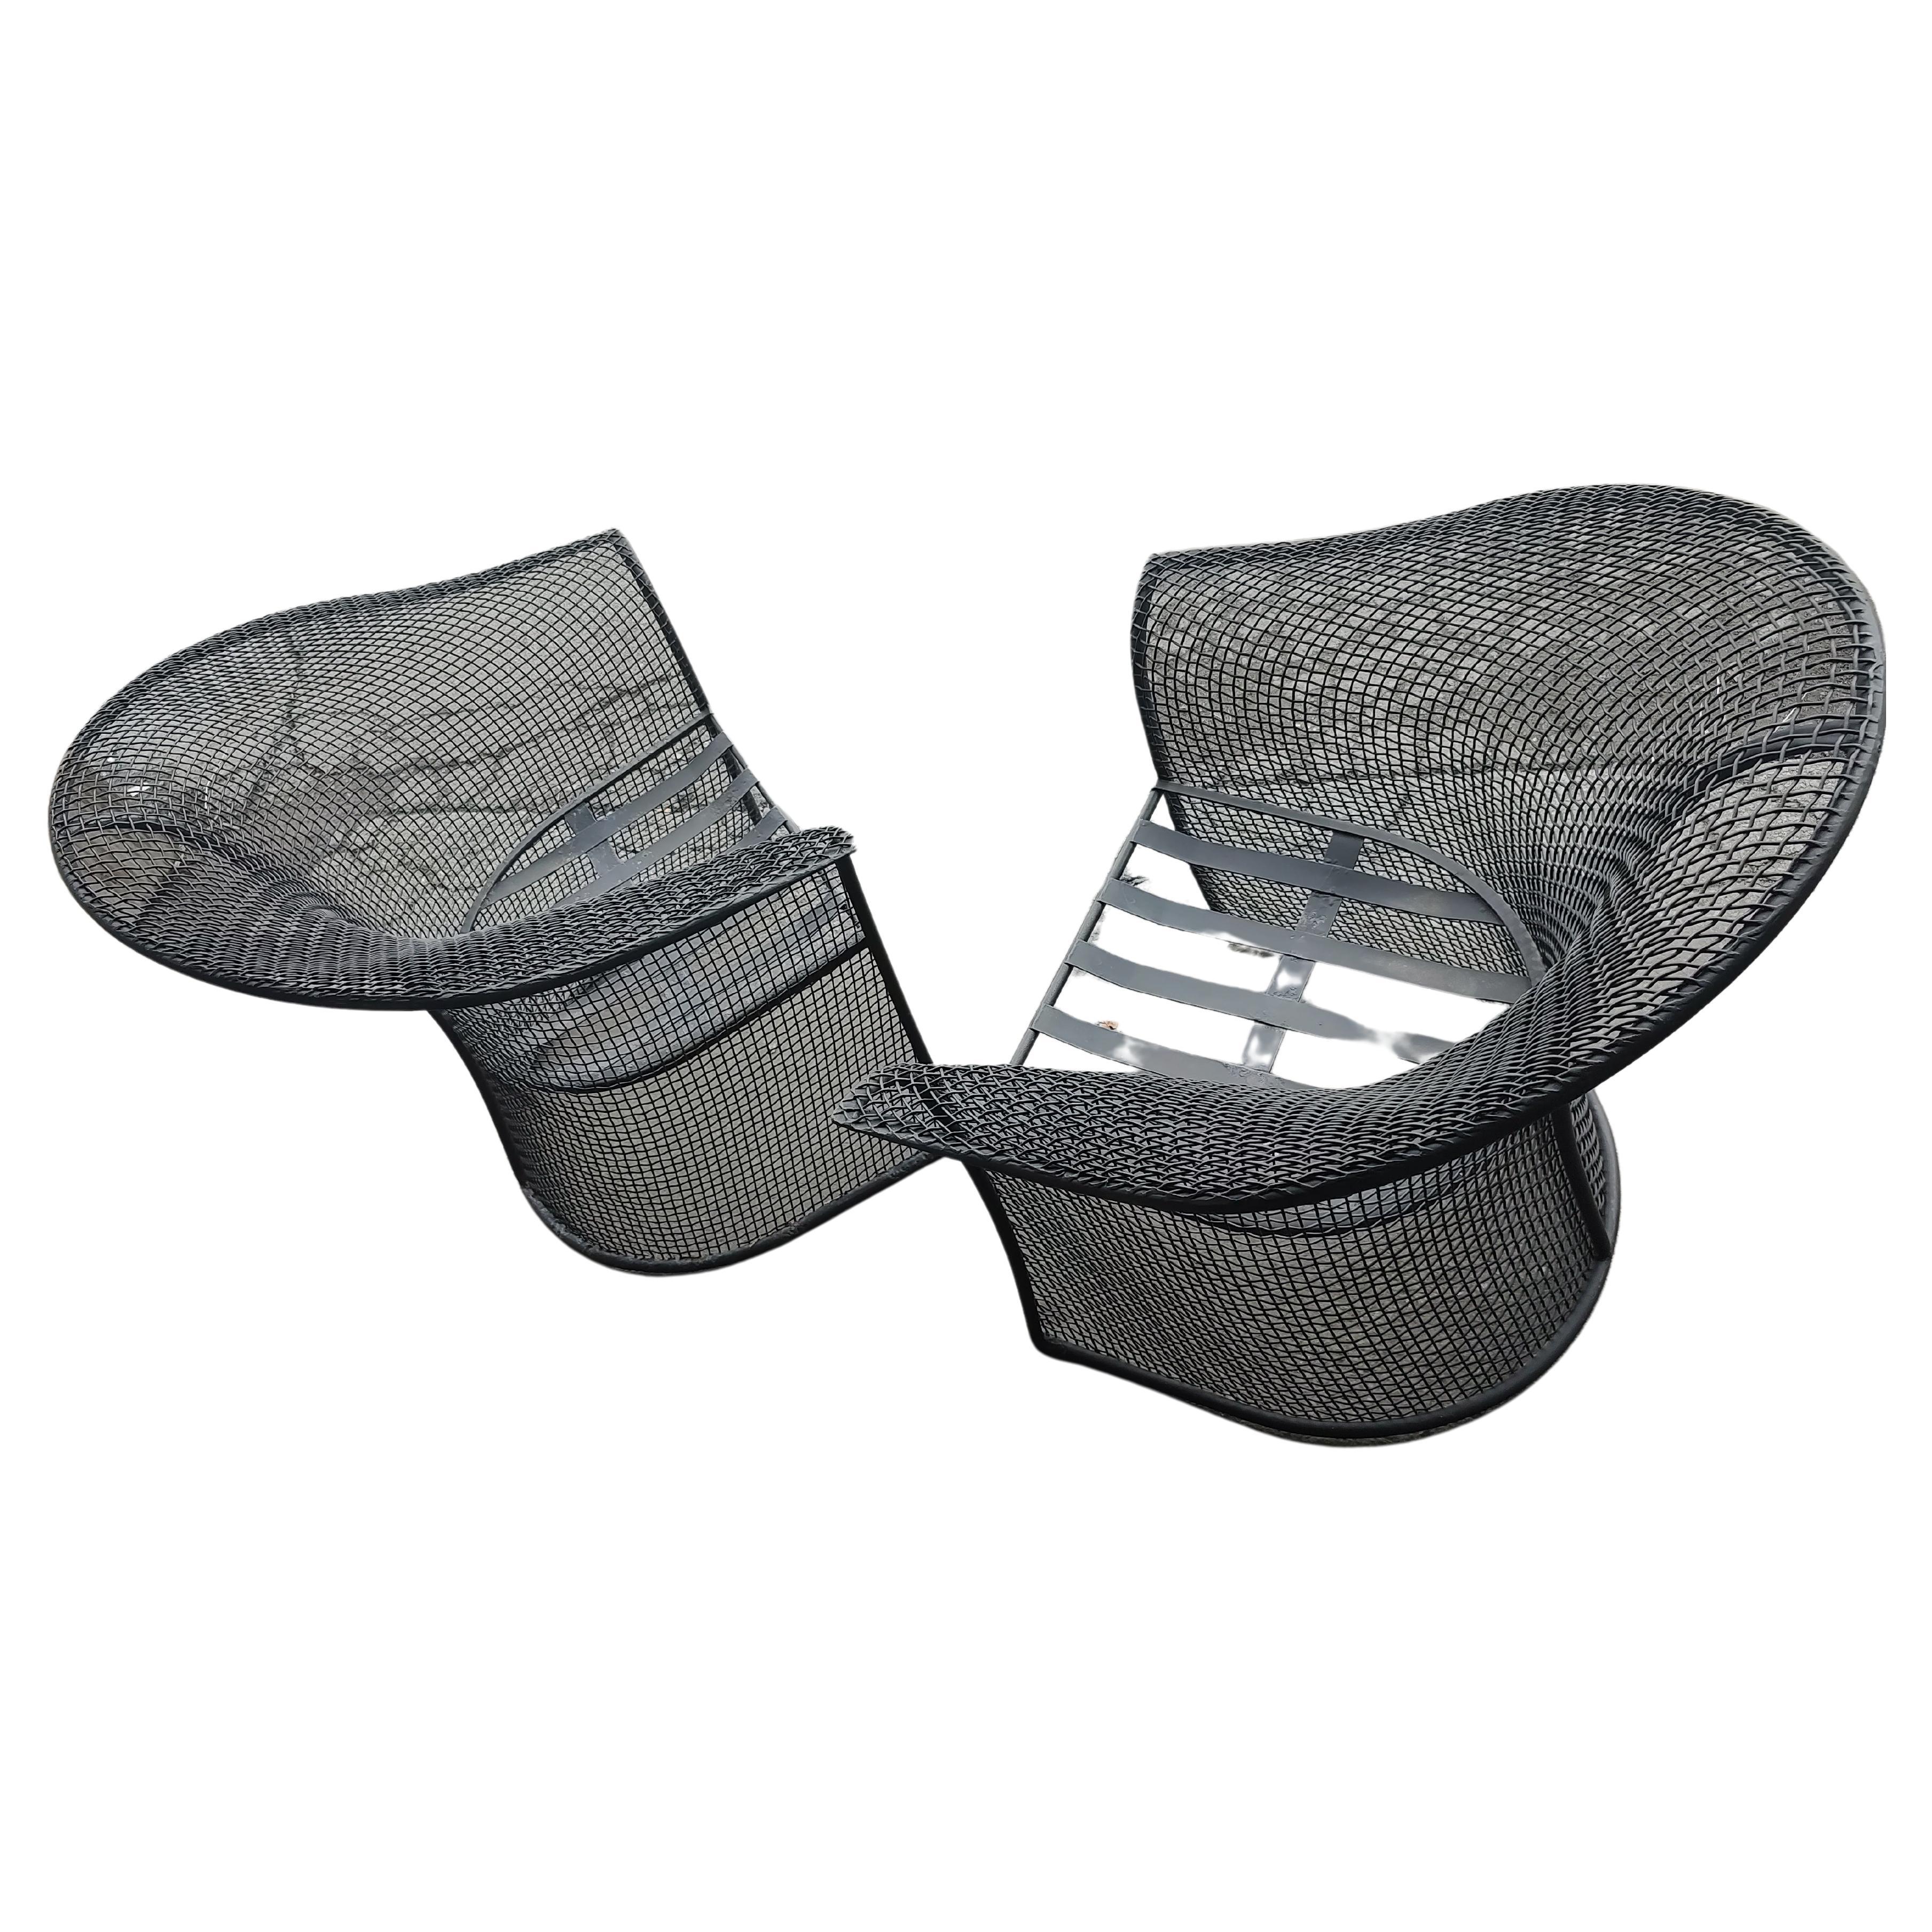 Rare and fabulous pair of Mid-Century Modern sculptural mesh lounge chairs in an unusual form. 
Painted black and with removable seat cushions. In excellent vintage condition, no damage, unrestored.